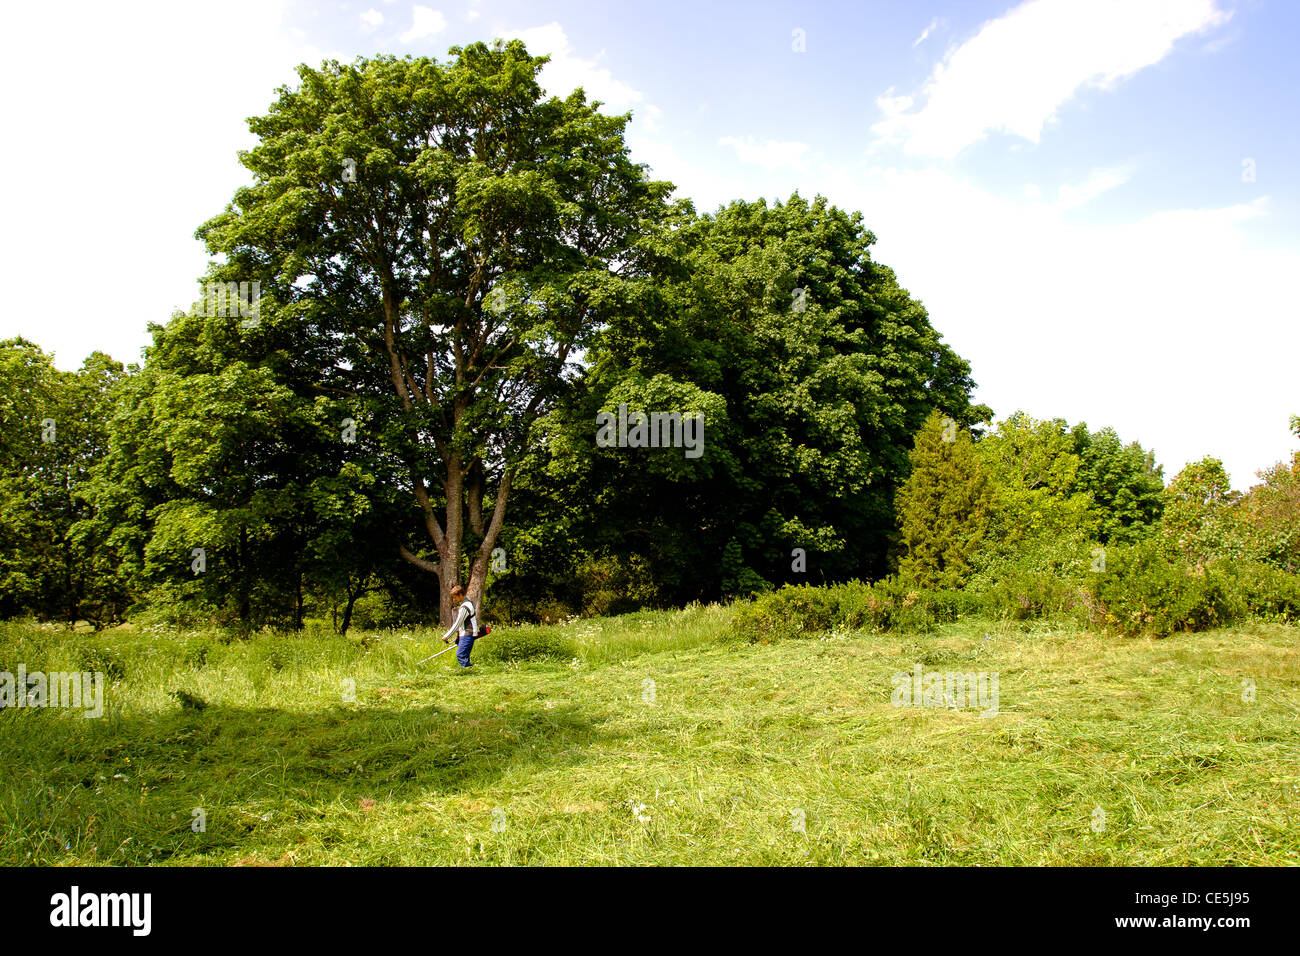 rural landscape with lawnmower cuts the grass Stock Photo